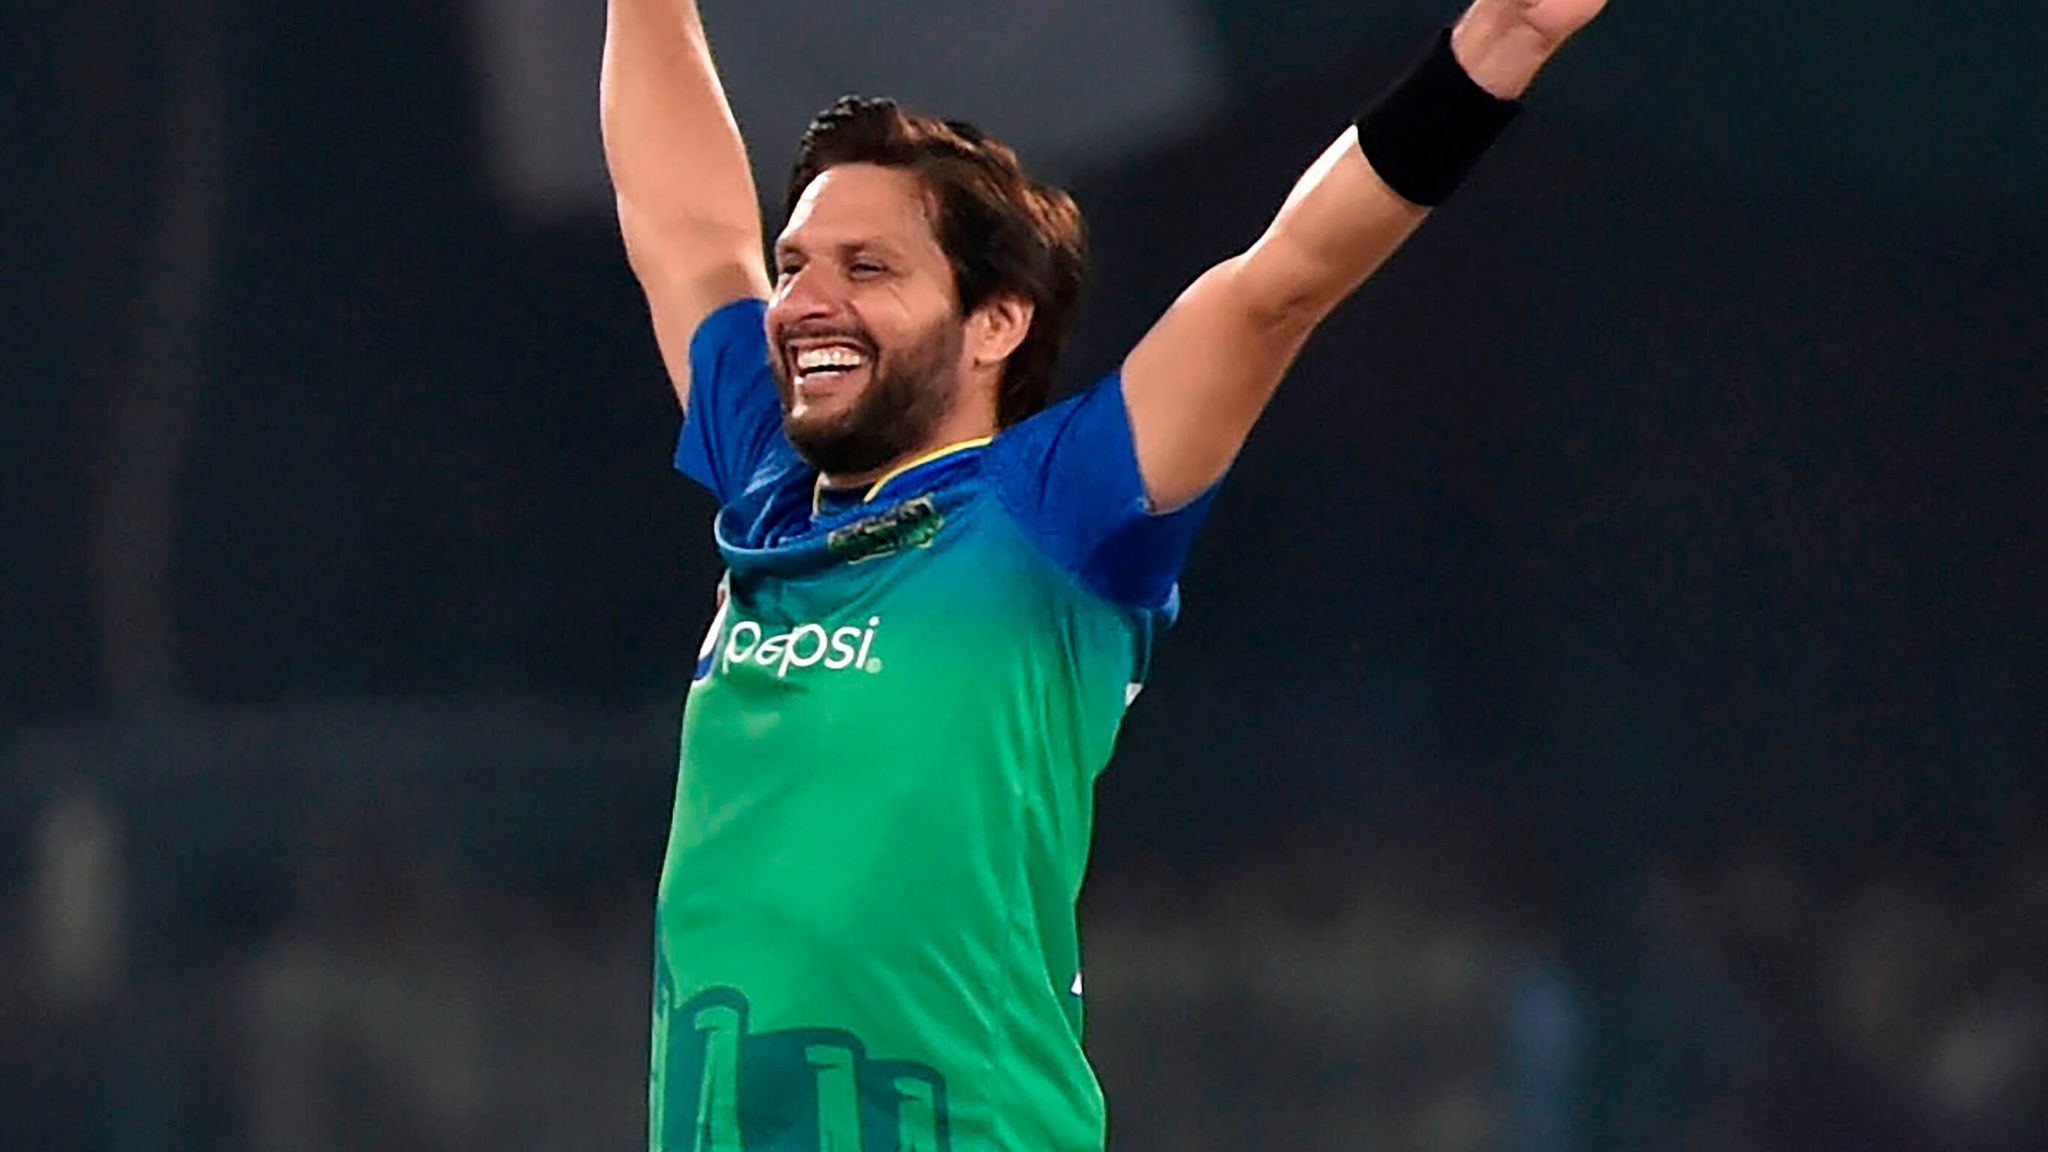 Well... who doesn't know the Boom Boom Shahid Afridi? He is a former Pakistani all-rounder who is famous for his hits in cricket match across the world. He is the one for whom spectators gathered in the stadium to watch the match. However, Shahid Afridi said goodbye to cricket in 2019. At present, he is working devotedly for his charity foundation, "Shahid Afridi Foundation." Moreover, we can see his pictures going viral on social media with his adorable daughters as he loves them a lot.  As mentioned above that Shahid Afridi has got a great fan following from all over the world so, people just jump to take pictures with him whenever, wherever they get a chance to meet him. All of these fans know him and recognize him in public places in the first glance. However, recently something happened that made the video go viral on social media. Here we have got the details! Shahid Afridi & Desi Aunty - Here Is What Actually Happened! So, a video has been going viral on social media in which we can see an aunt who is standing along with her daughters on the airport. The daughters told their mother about Shahid Afridi also standing at a short distance from them. However, the aunt couldn't recognize him. Right at the moment, the aunt called out Shahid Afridi and said, "Come over here. My daughters are saying that you are Shahid Afridi. Please take a picture with them." The kind and the generous Afridi didn't mind and agreed for the picture that turned the moment memorable for everyone. Here we have got the video so, watch now! The Boom Boom Afridi is known well for his polite behaviour with the fans and this video is the perfect example of that. What do you think about Shahid Afridi and this amazing video? Don't forget to share your valuable feedback with us!